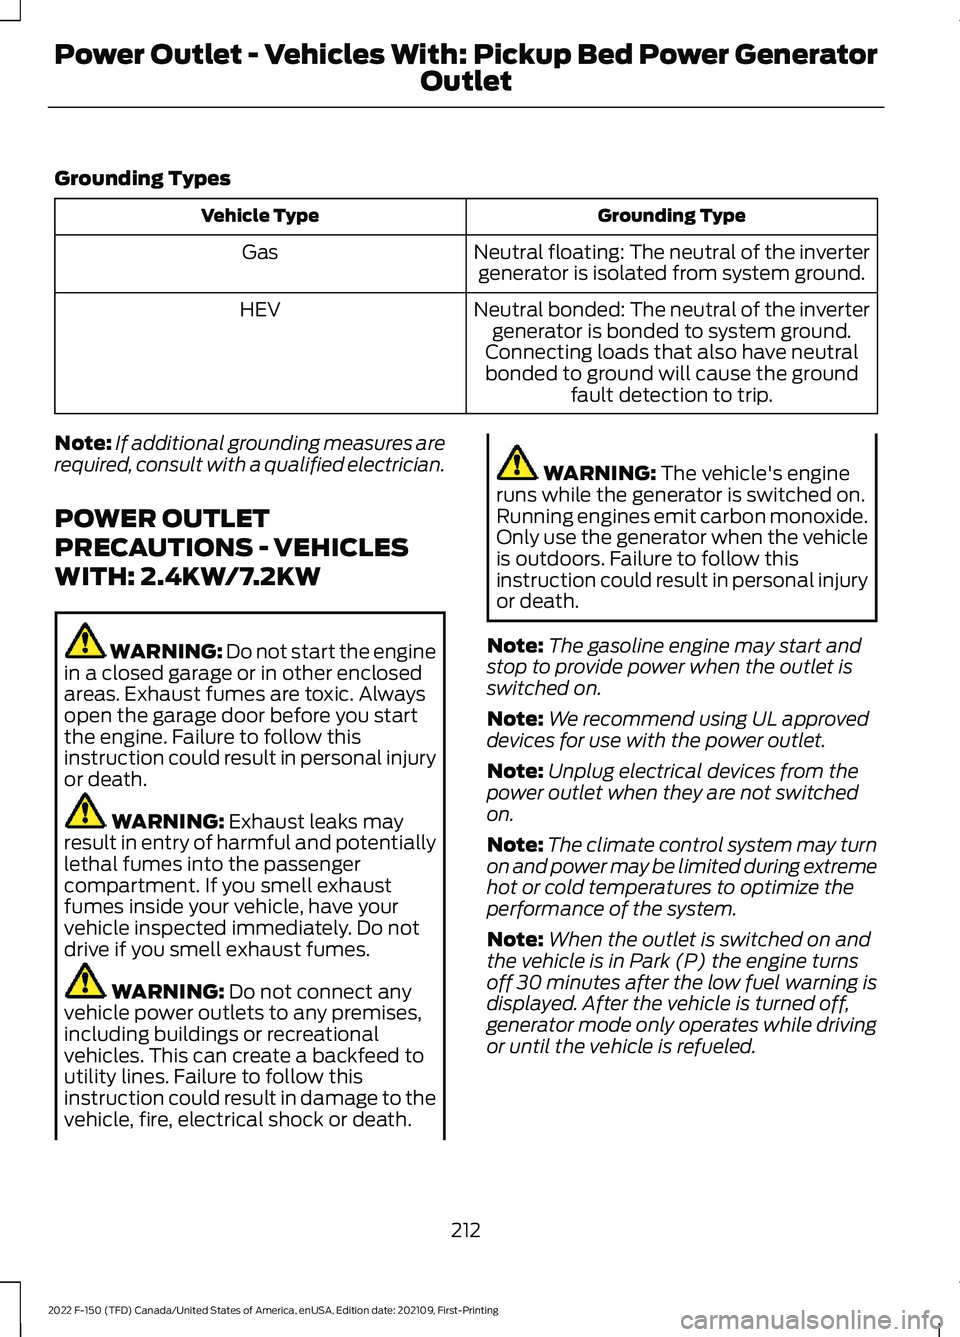 FORD F-150 2022  Owners Manual Grounding Types
Grounding Type
Vehicle Type
Neutral floating: The neutral of the invertergenerator is isolated from system ground.
Gas
Neutral bonded: The neutral of the invertergenerator is bonded to